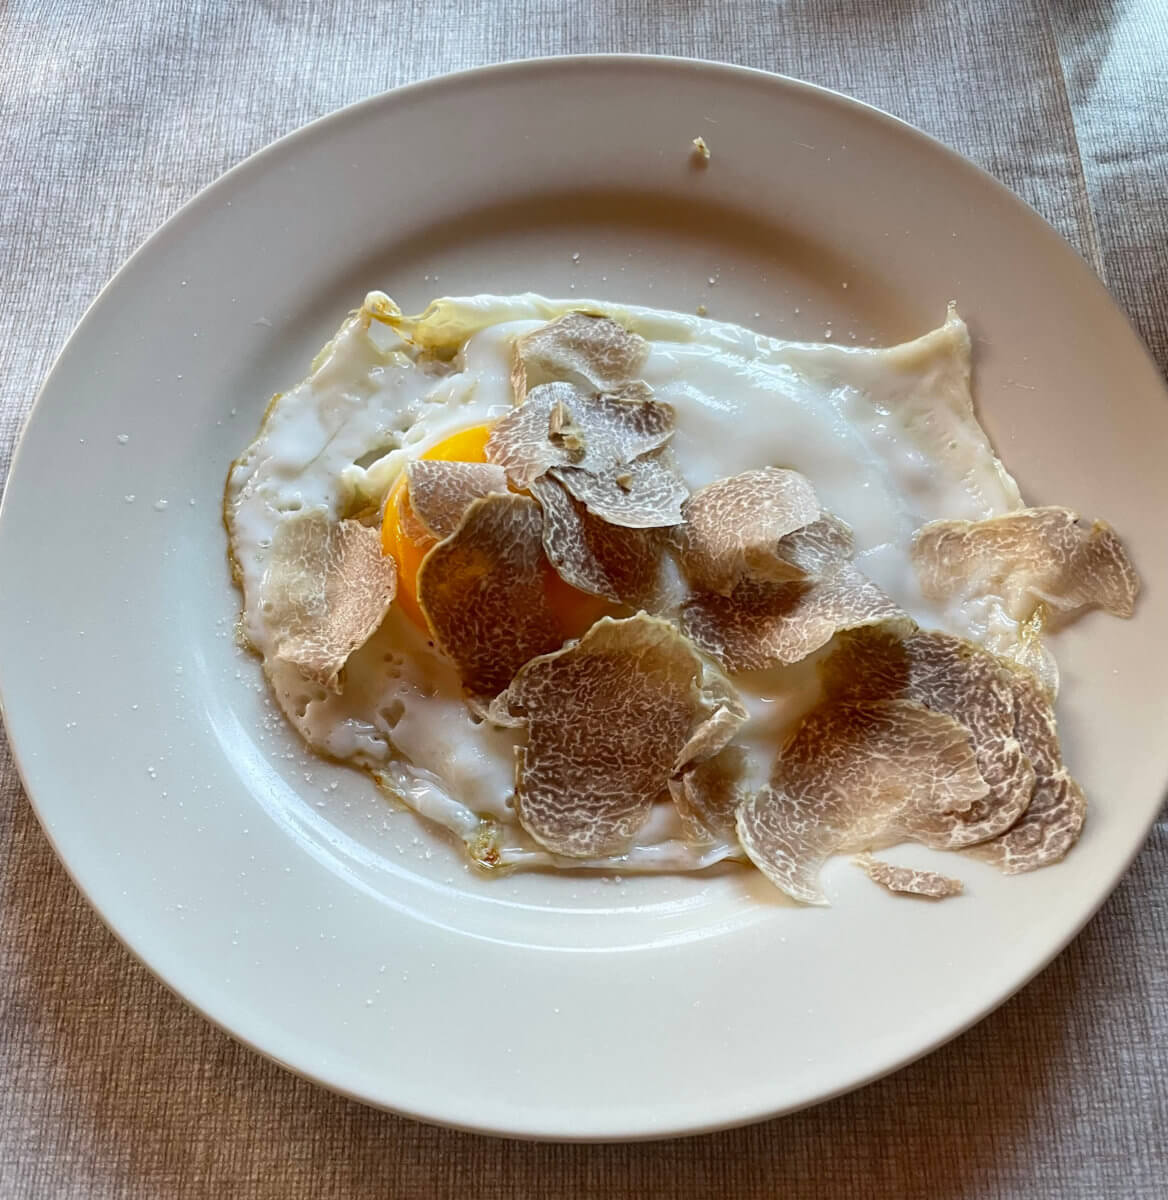 Fried egg with truffles